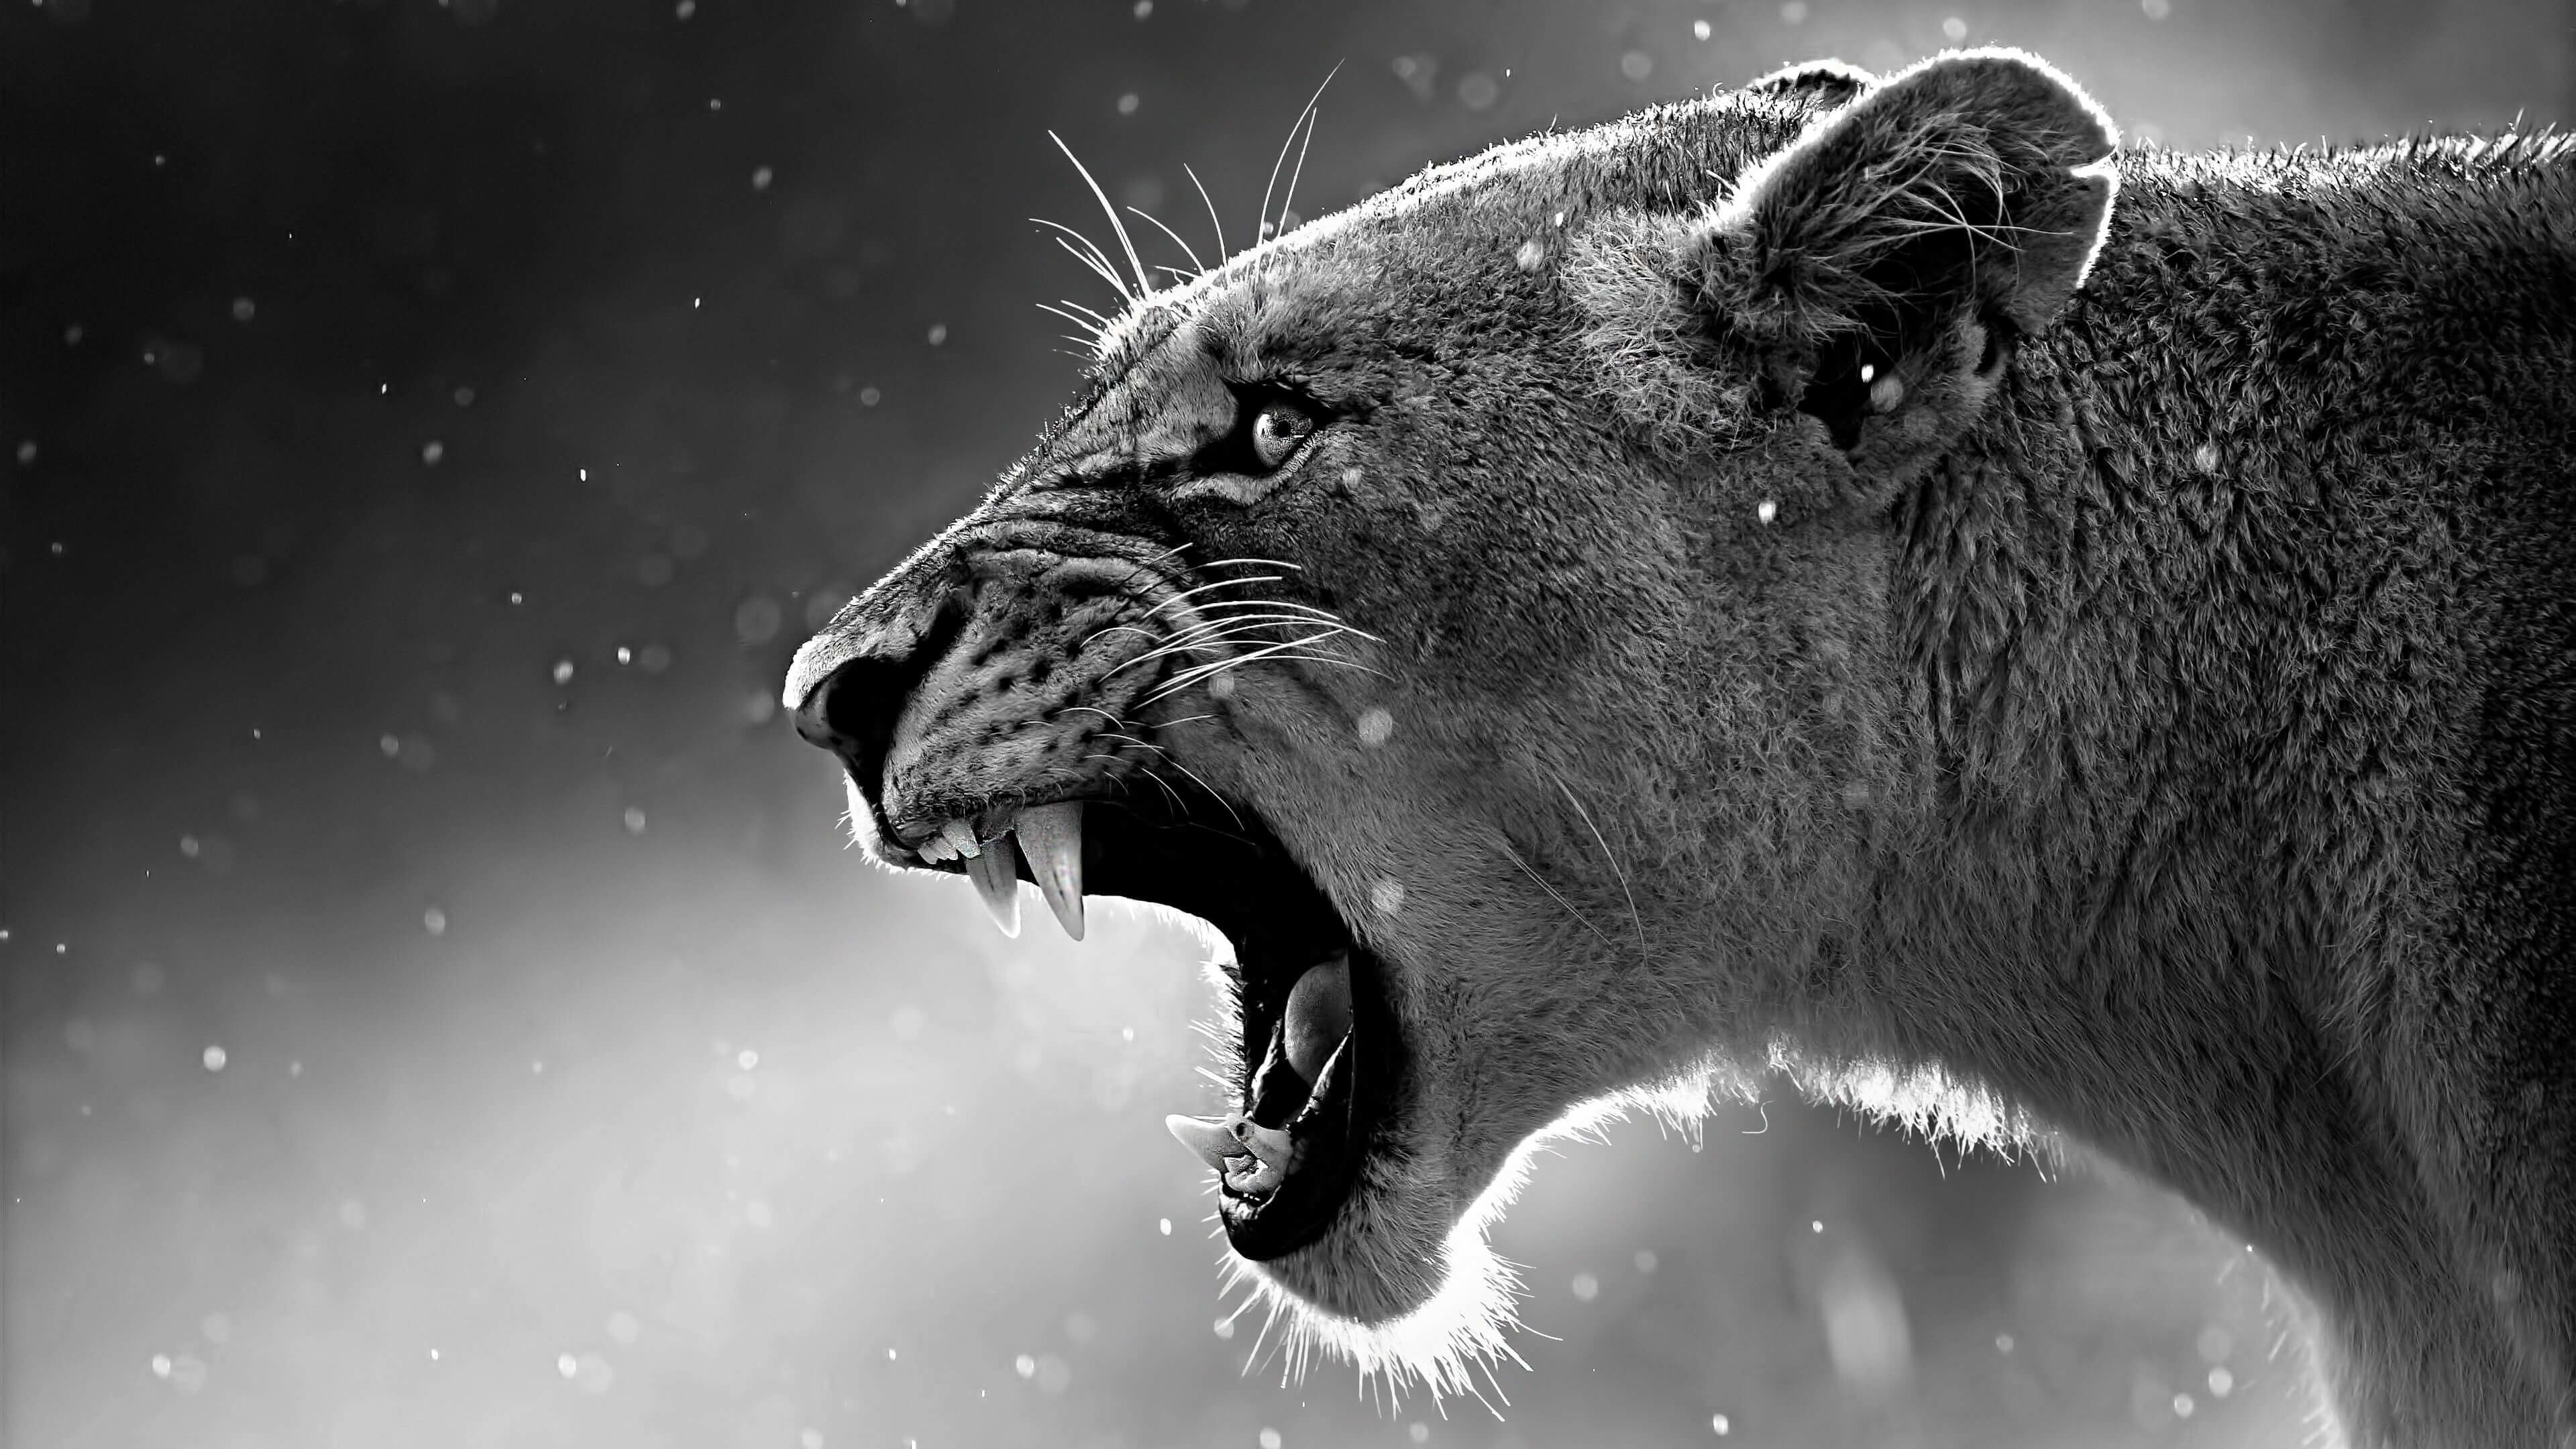 3840x2160 lioness in black and white wallpaper for 4k desktop hd background wallpapers  free amazing cool tablet